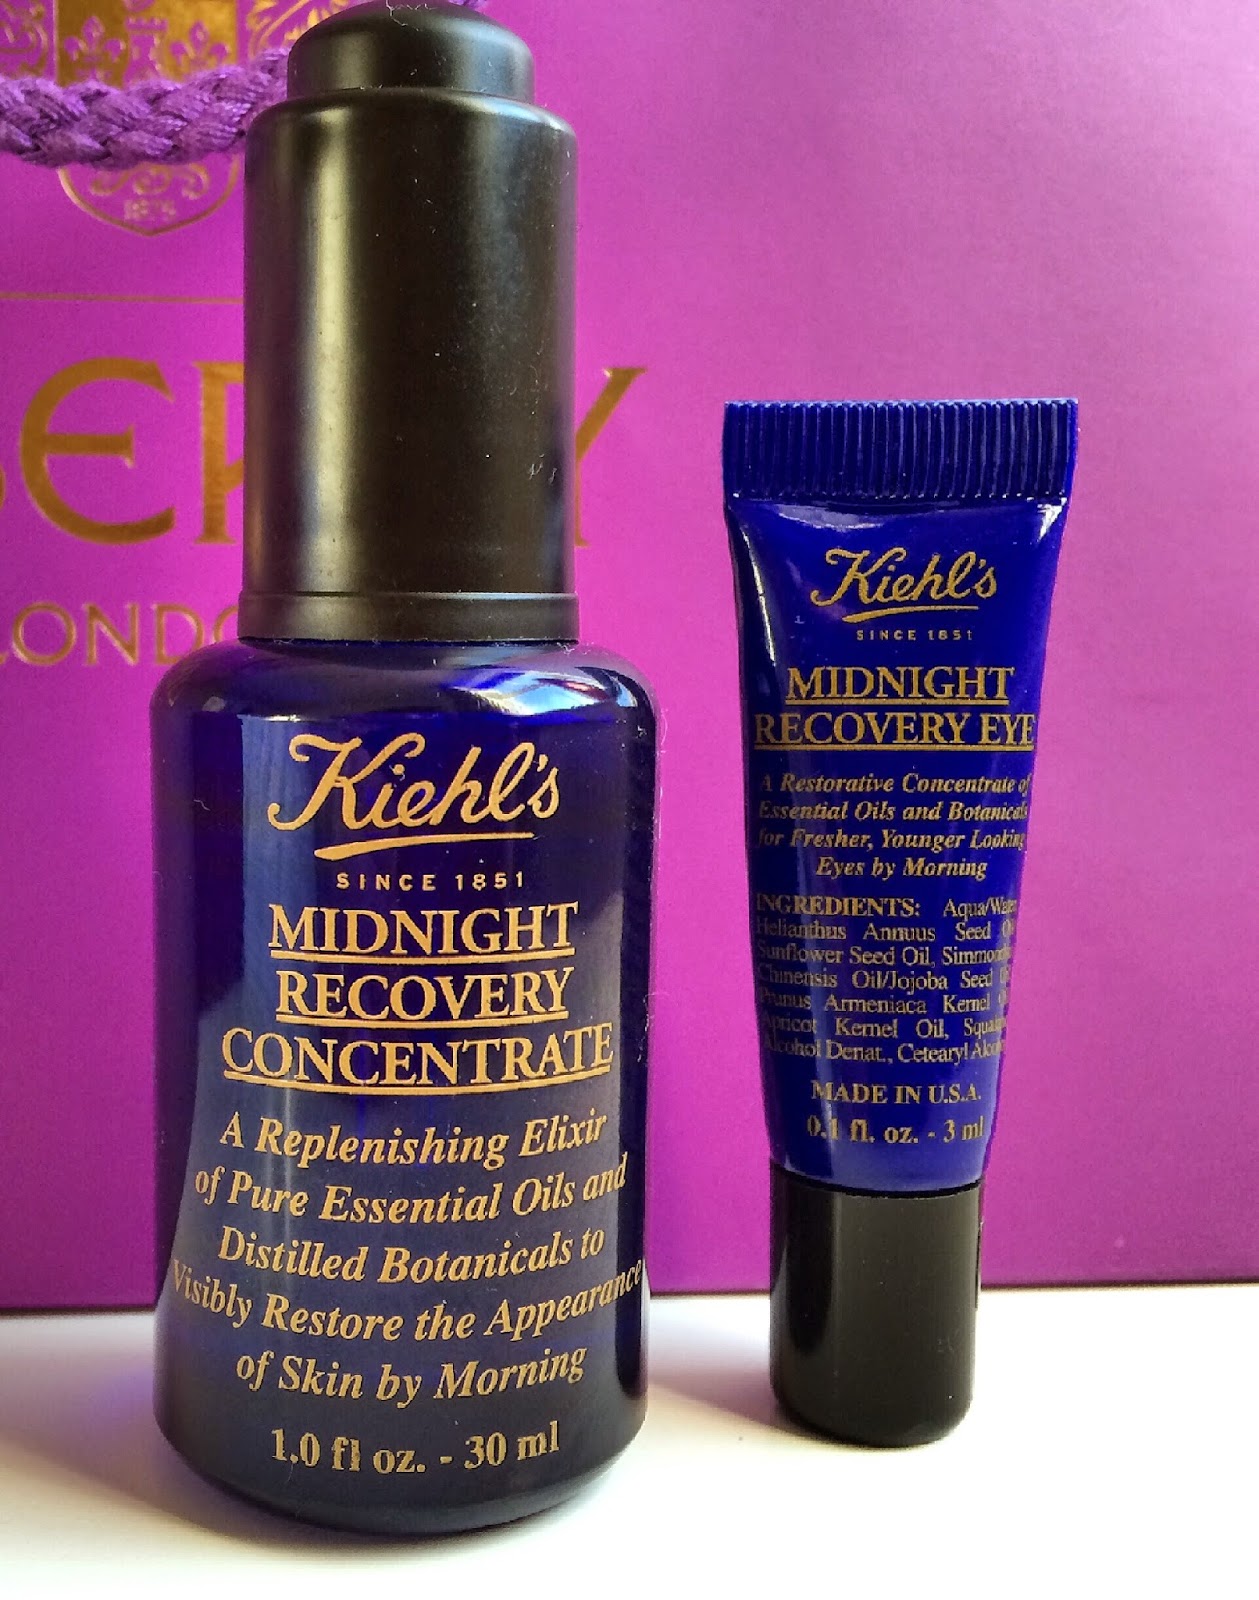 Kiehl's Midnight Recovery Concentrate skincare